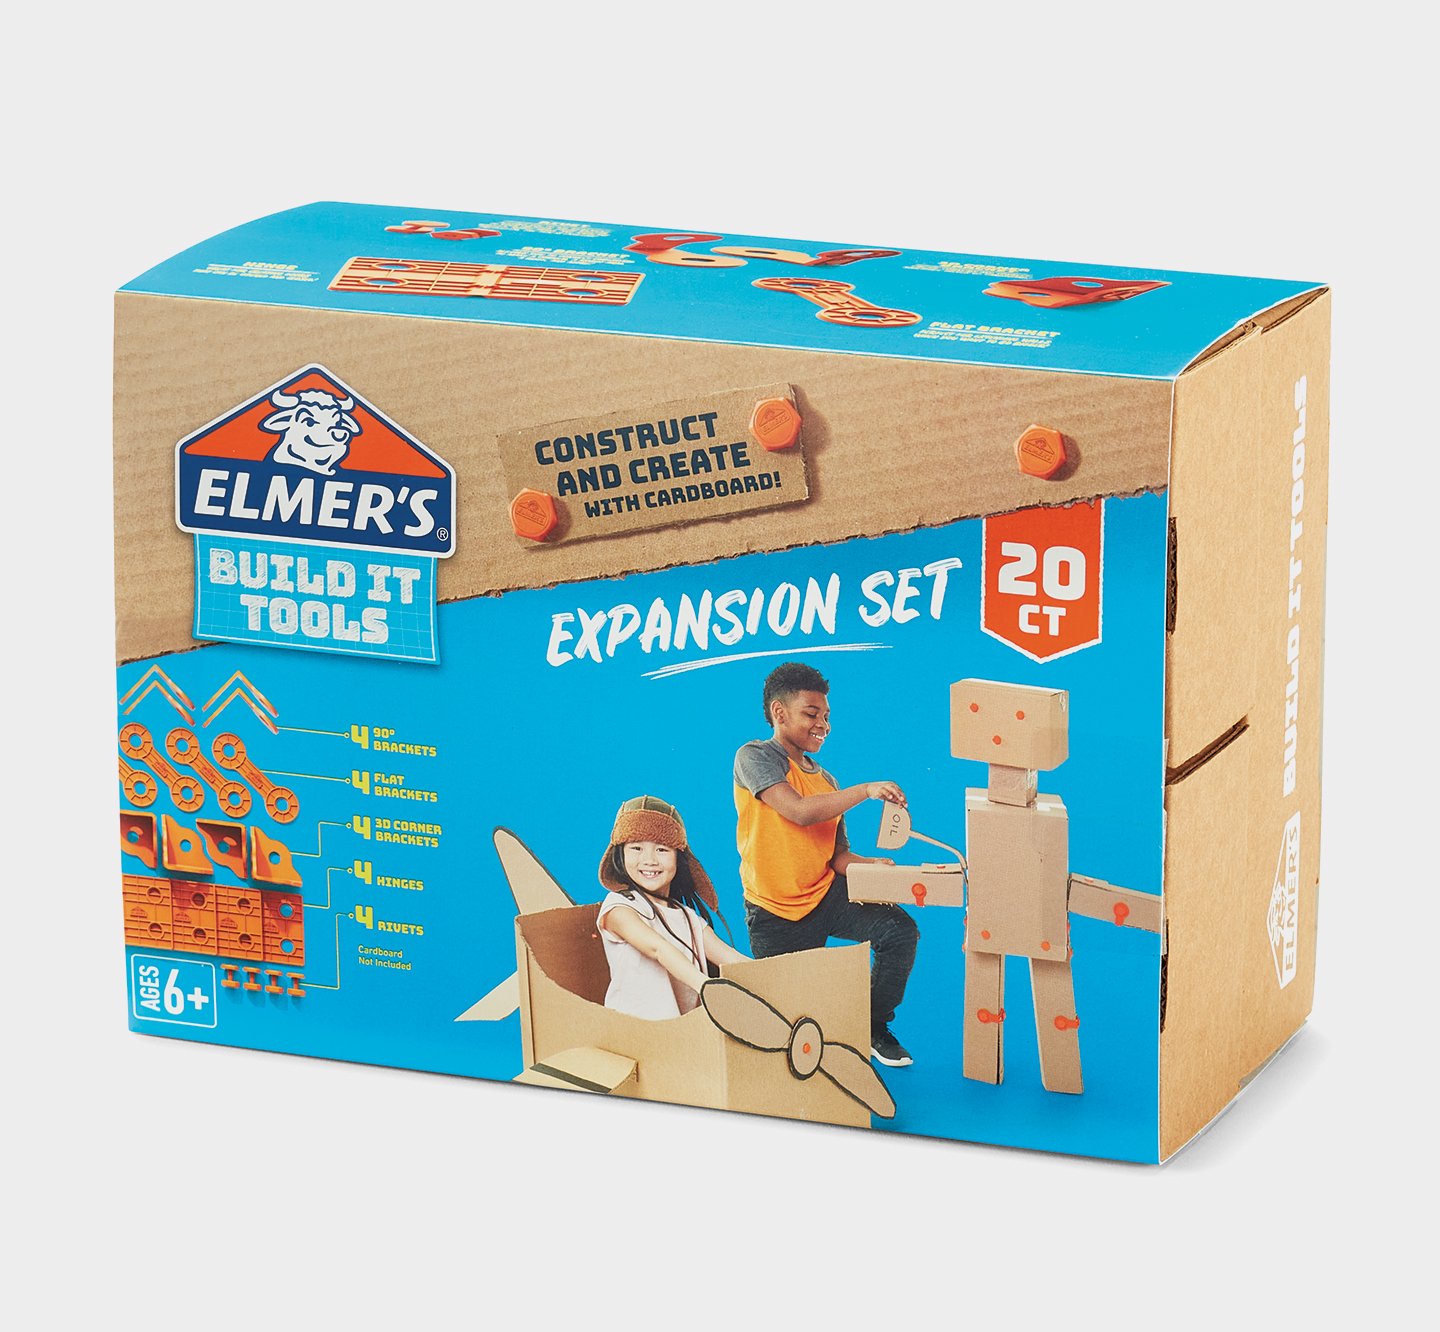 How to Join the Elmer's Glue Crew + Build Your Own Recycling Bin & Donate  School Supplies #BagItForward